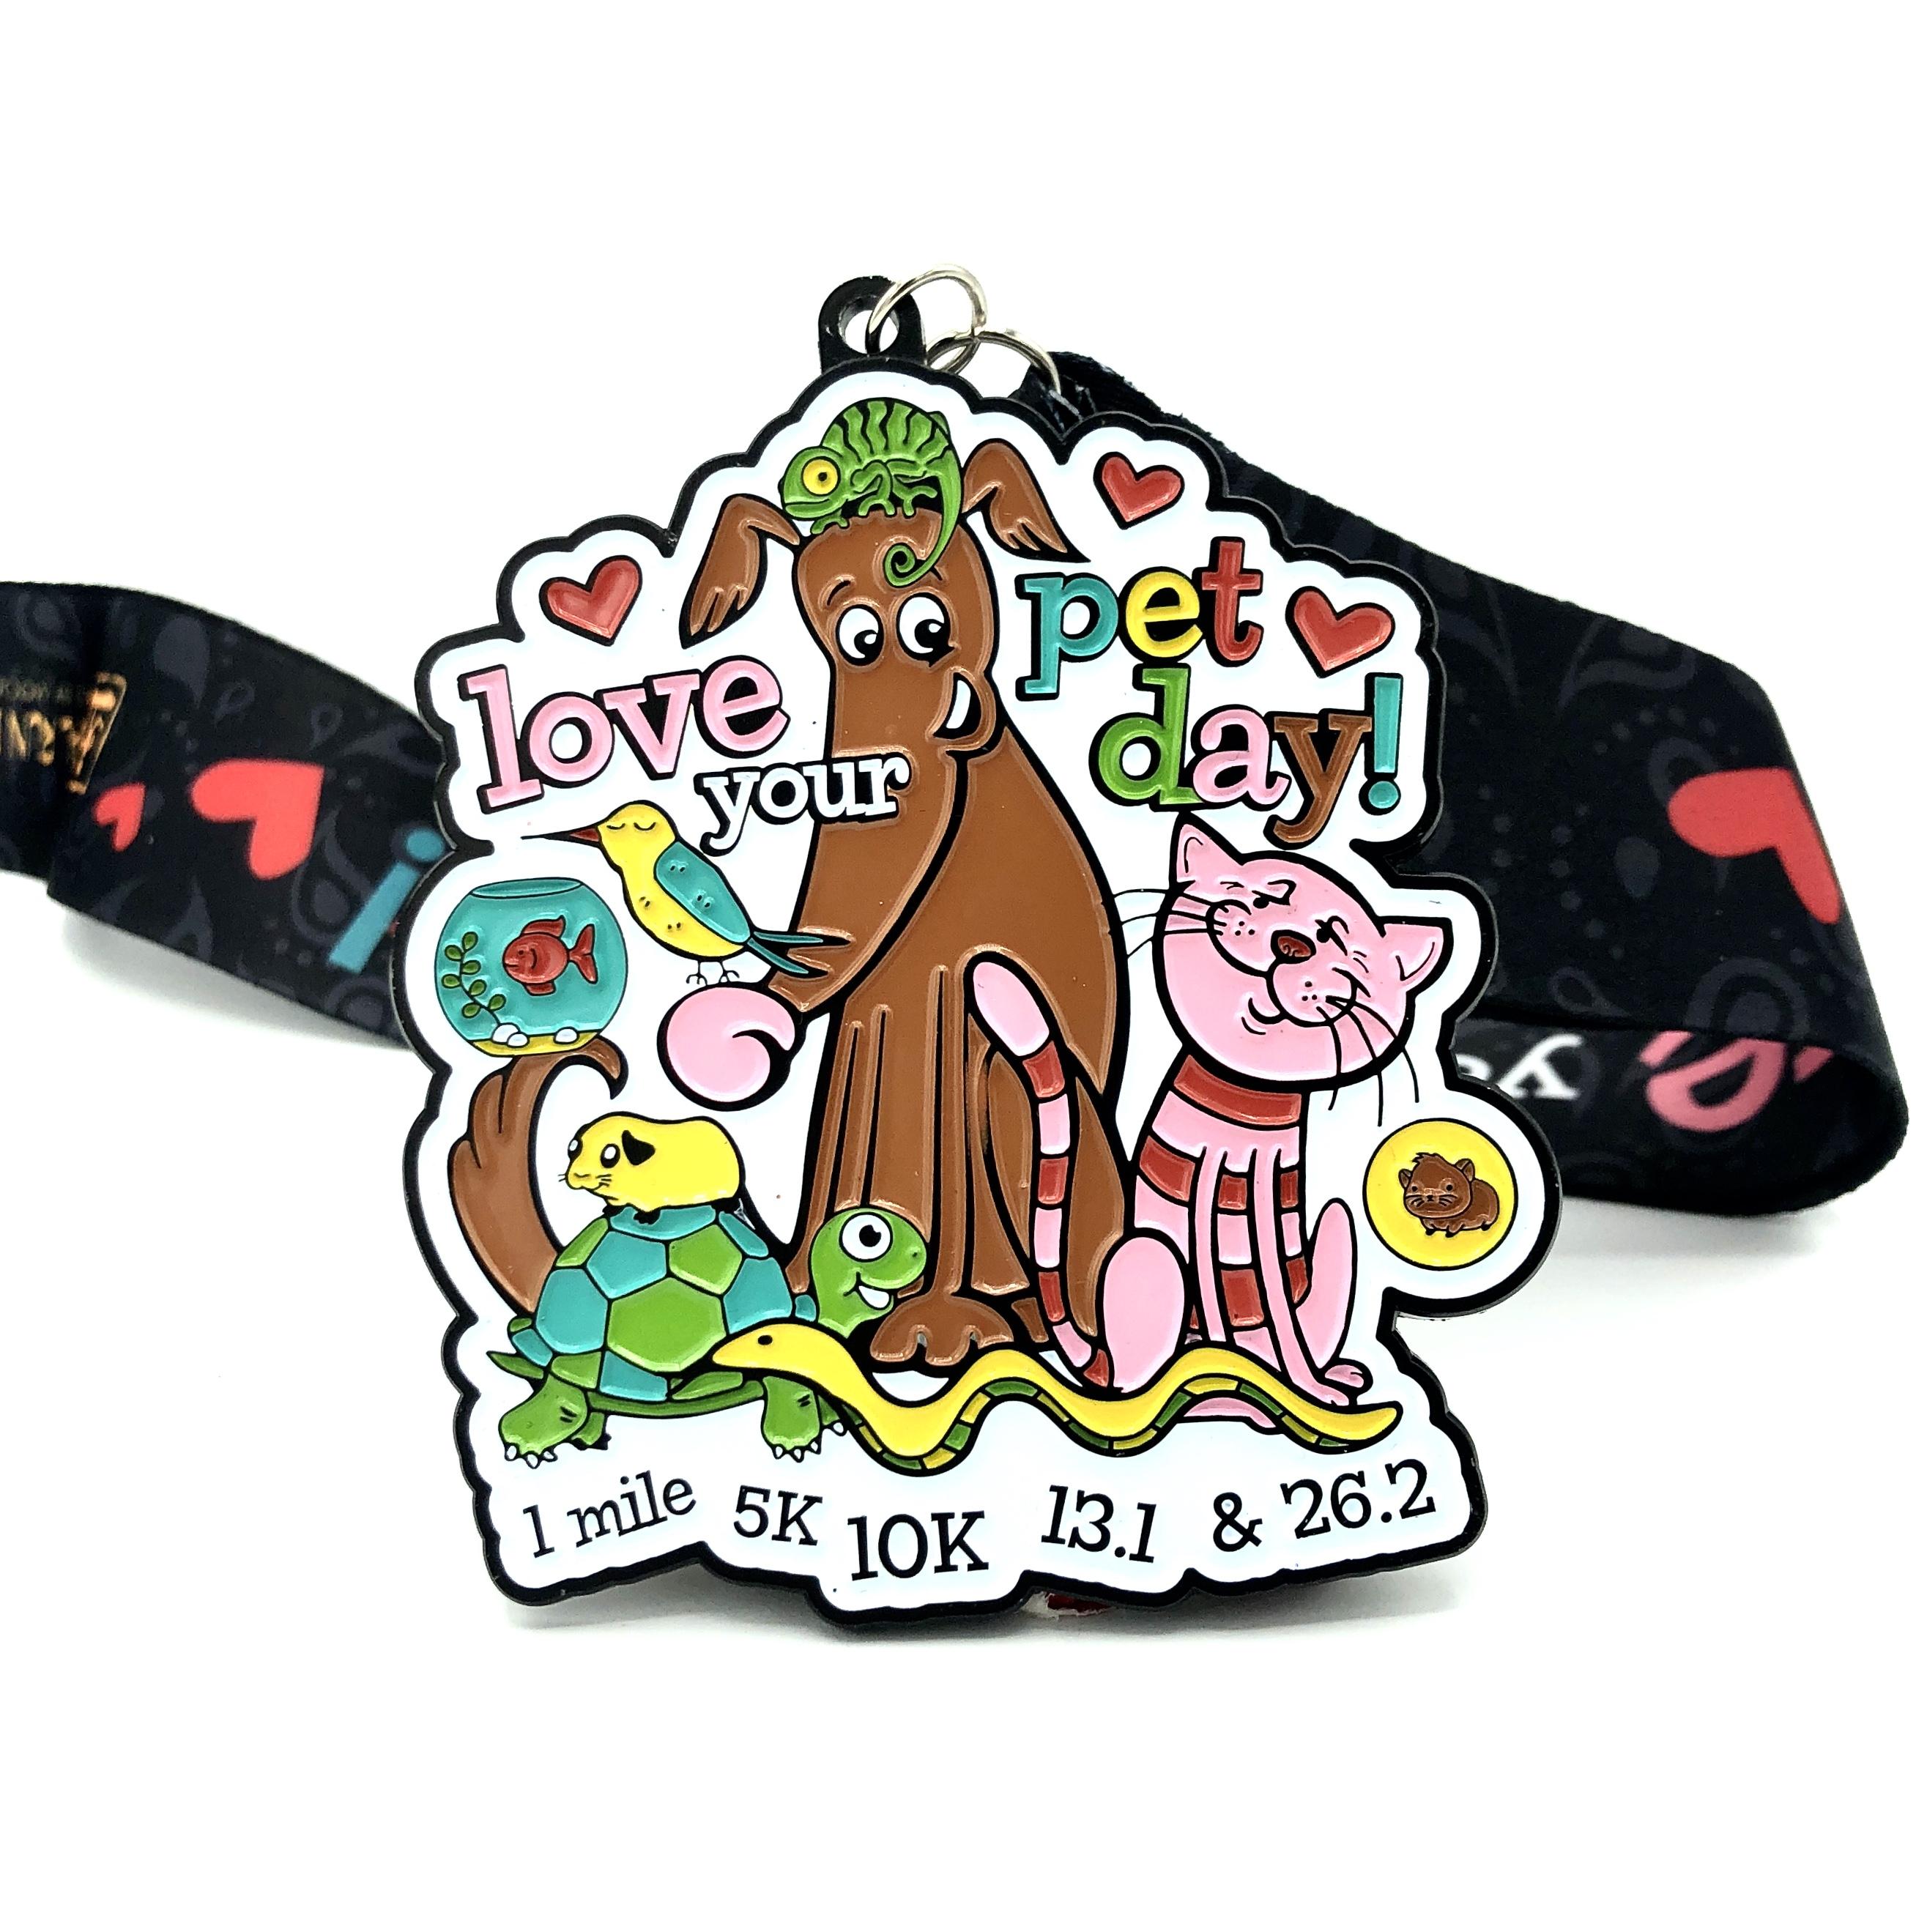 Love Your Pet Day 1M, 5K, 10K, 13.1, 26.2 -Los Angeles